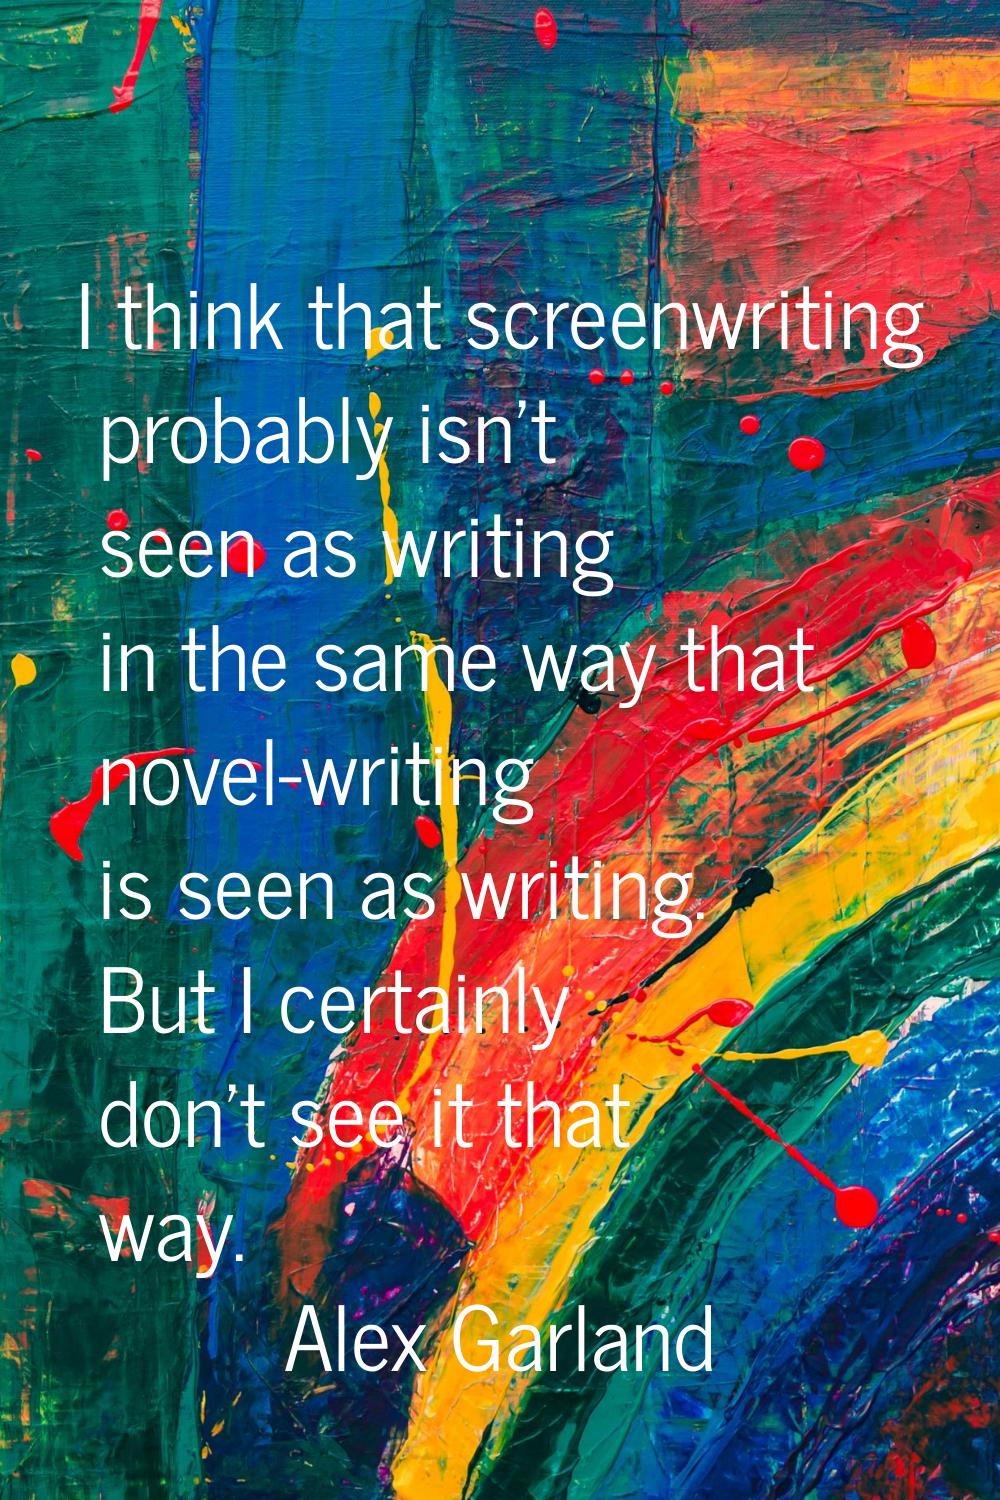 I think that screenwriting probably isn't seen as writing in the same way that novel-writing is see